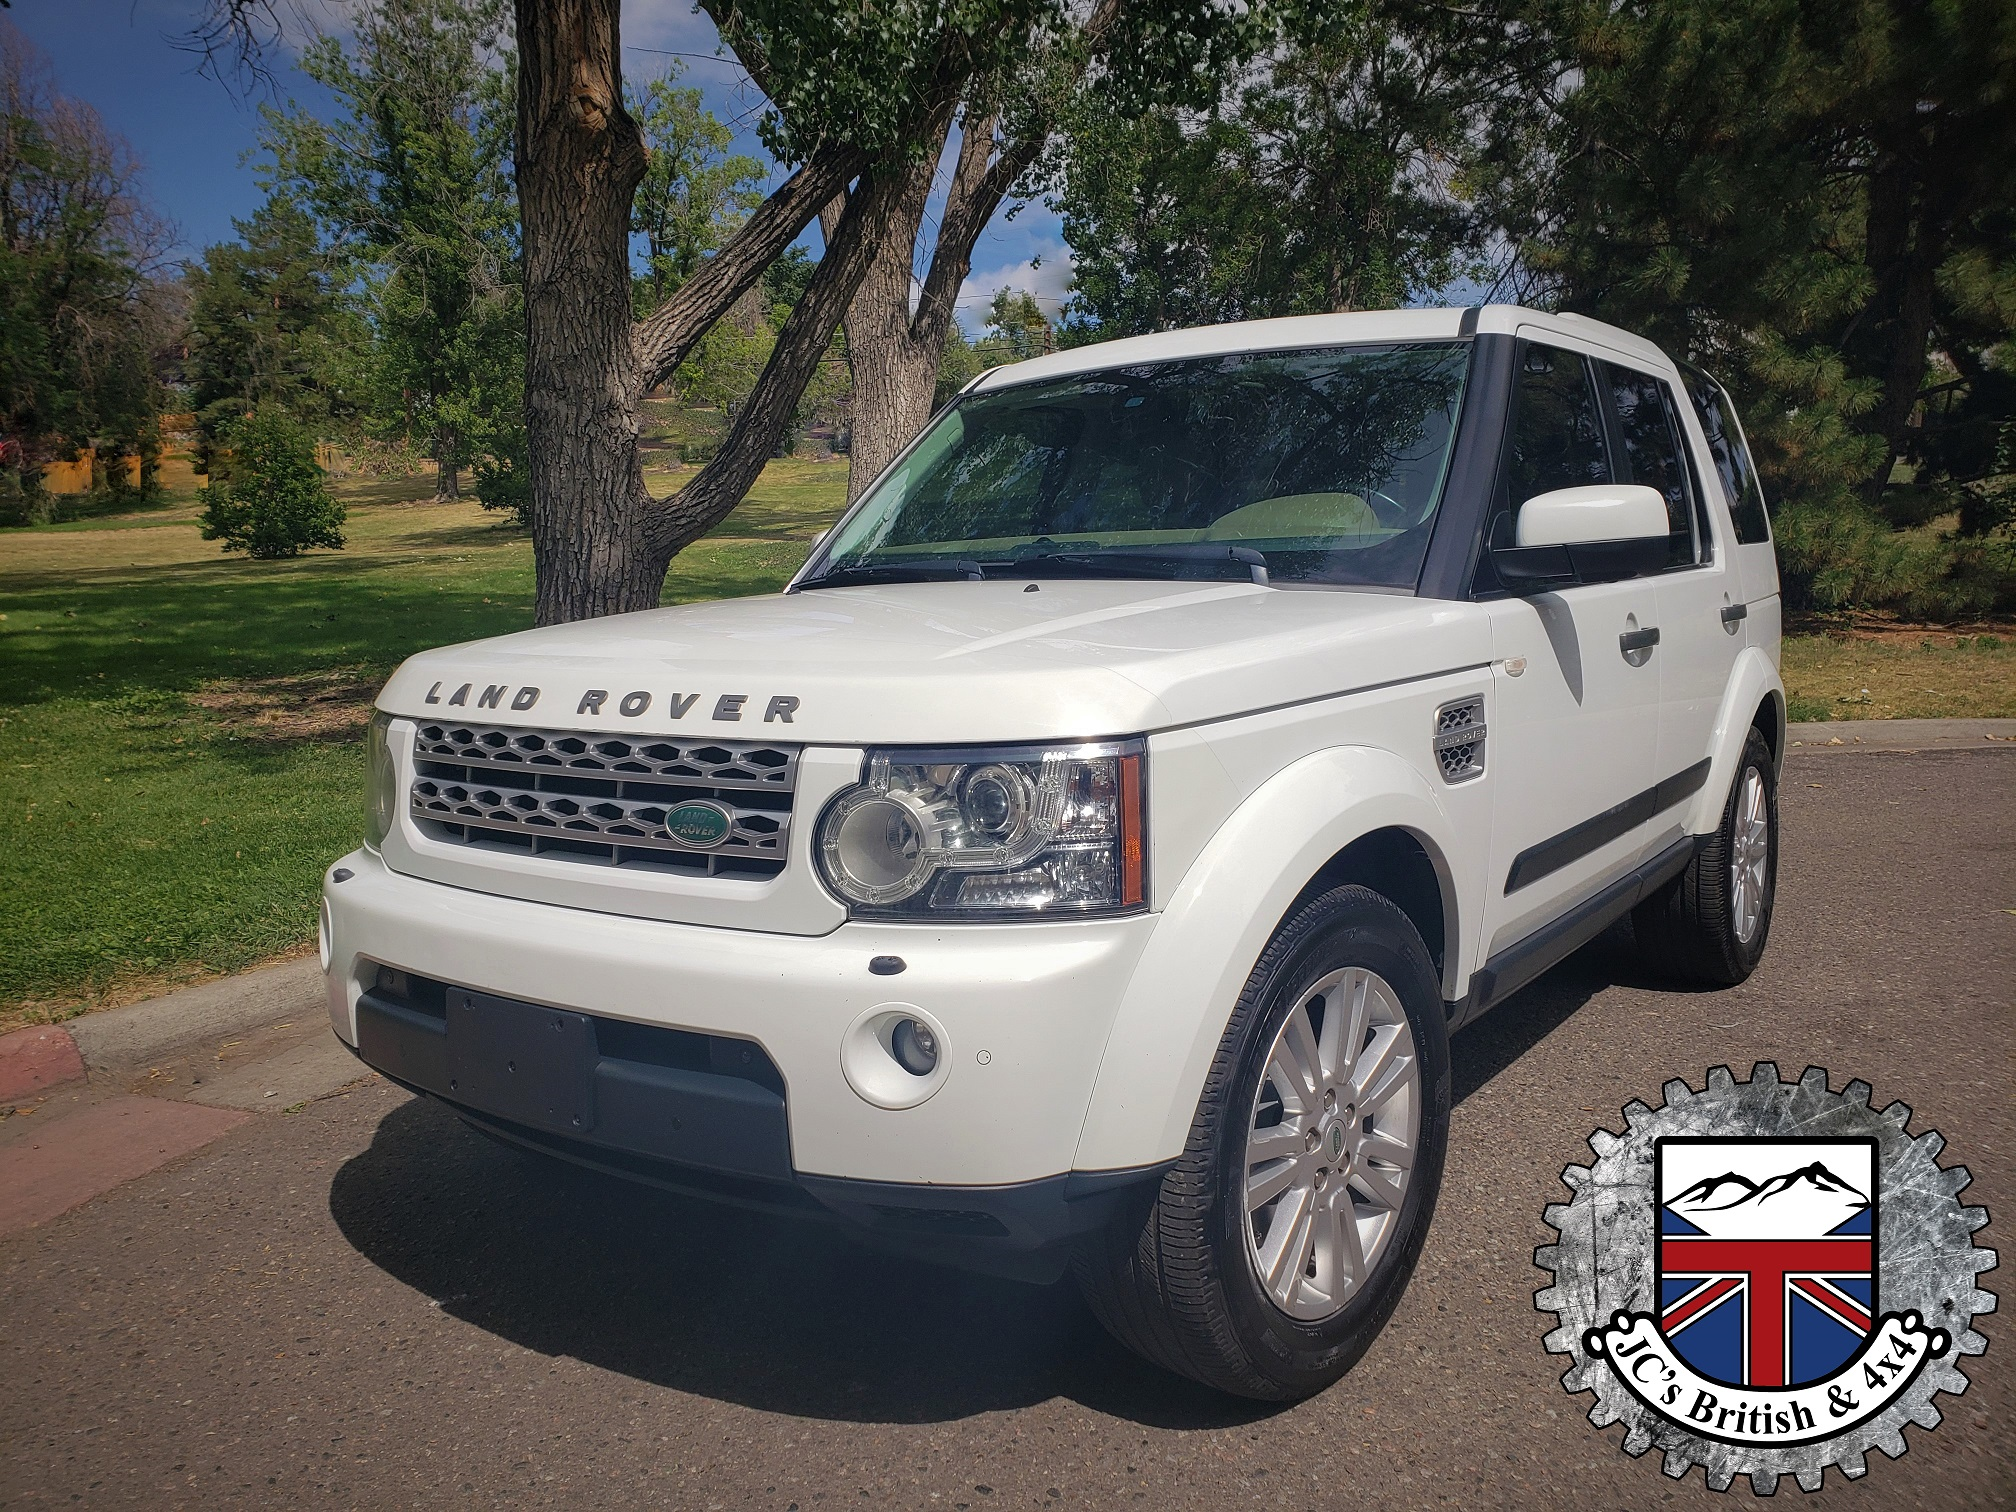 2011 Land Rover LR4 HSE preview